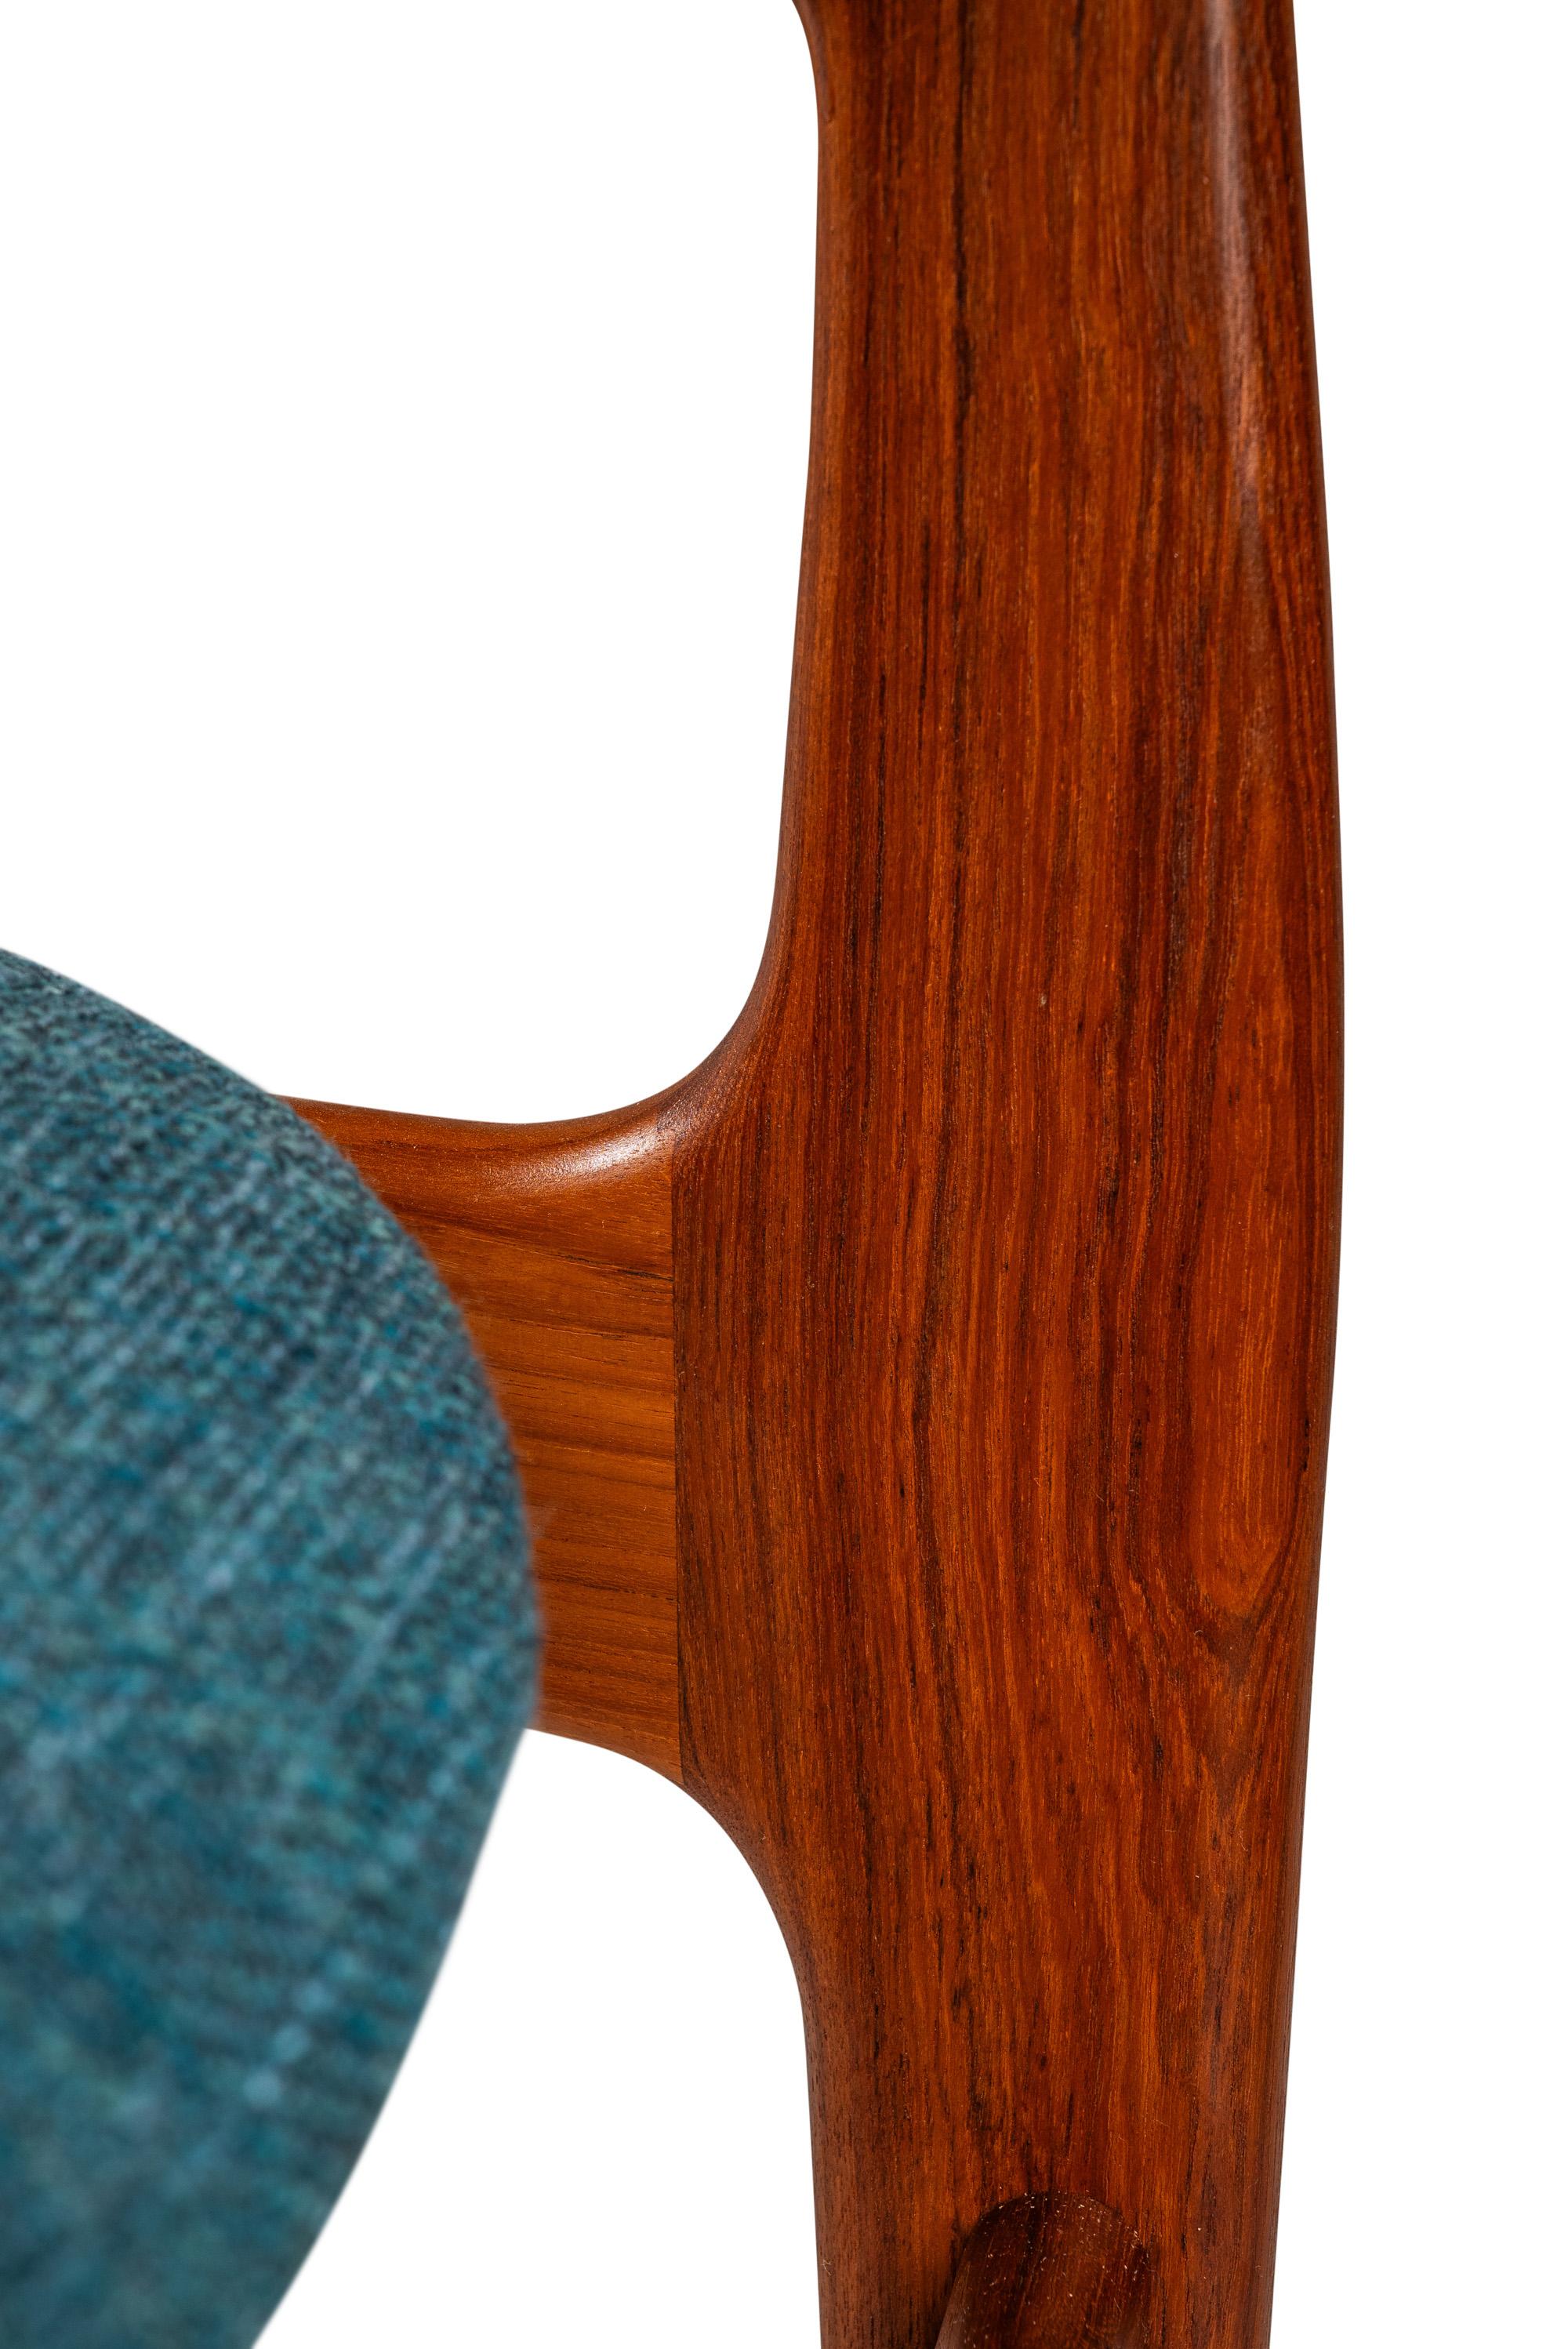 Dining / Desk / Chair in Solid Teak & New Upholstery by Benny Linden, c. 1980s For Sale 3